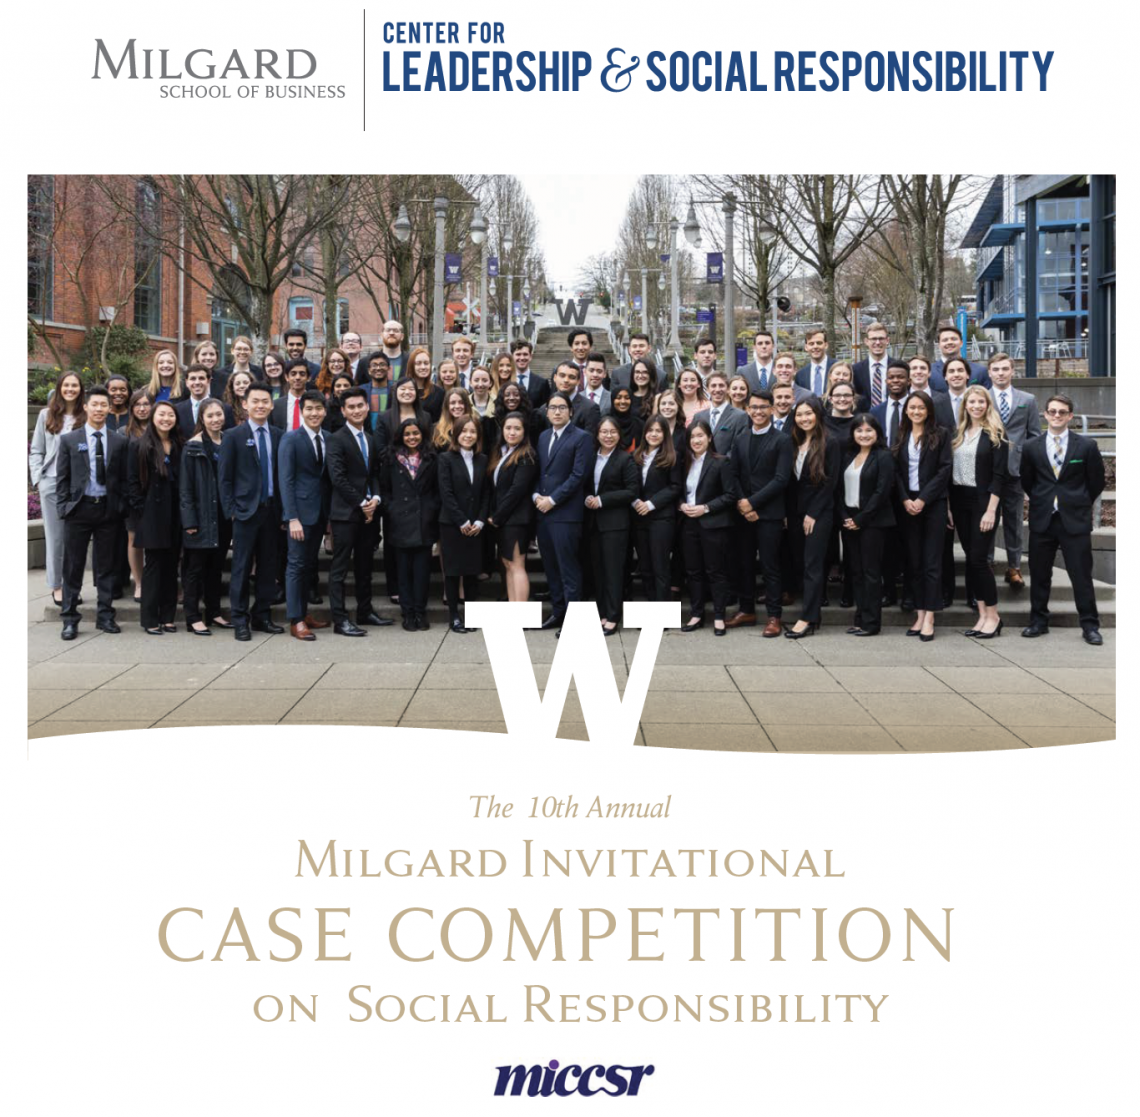 Call For The Milgard Invitation Case Competition On Social Responsibility  -